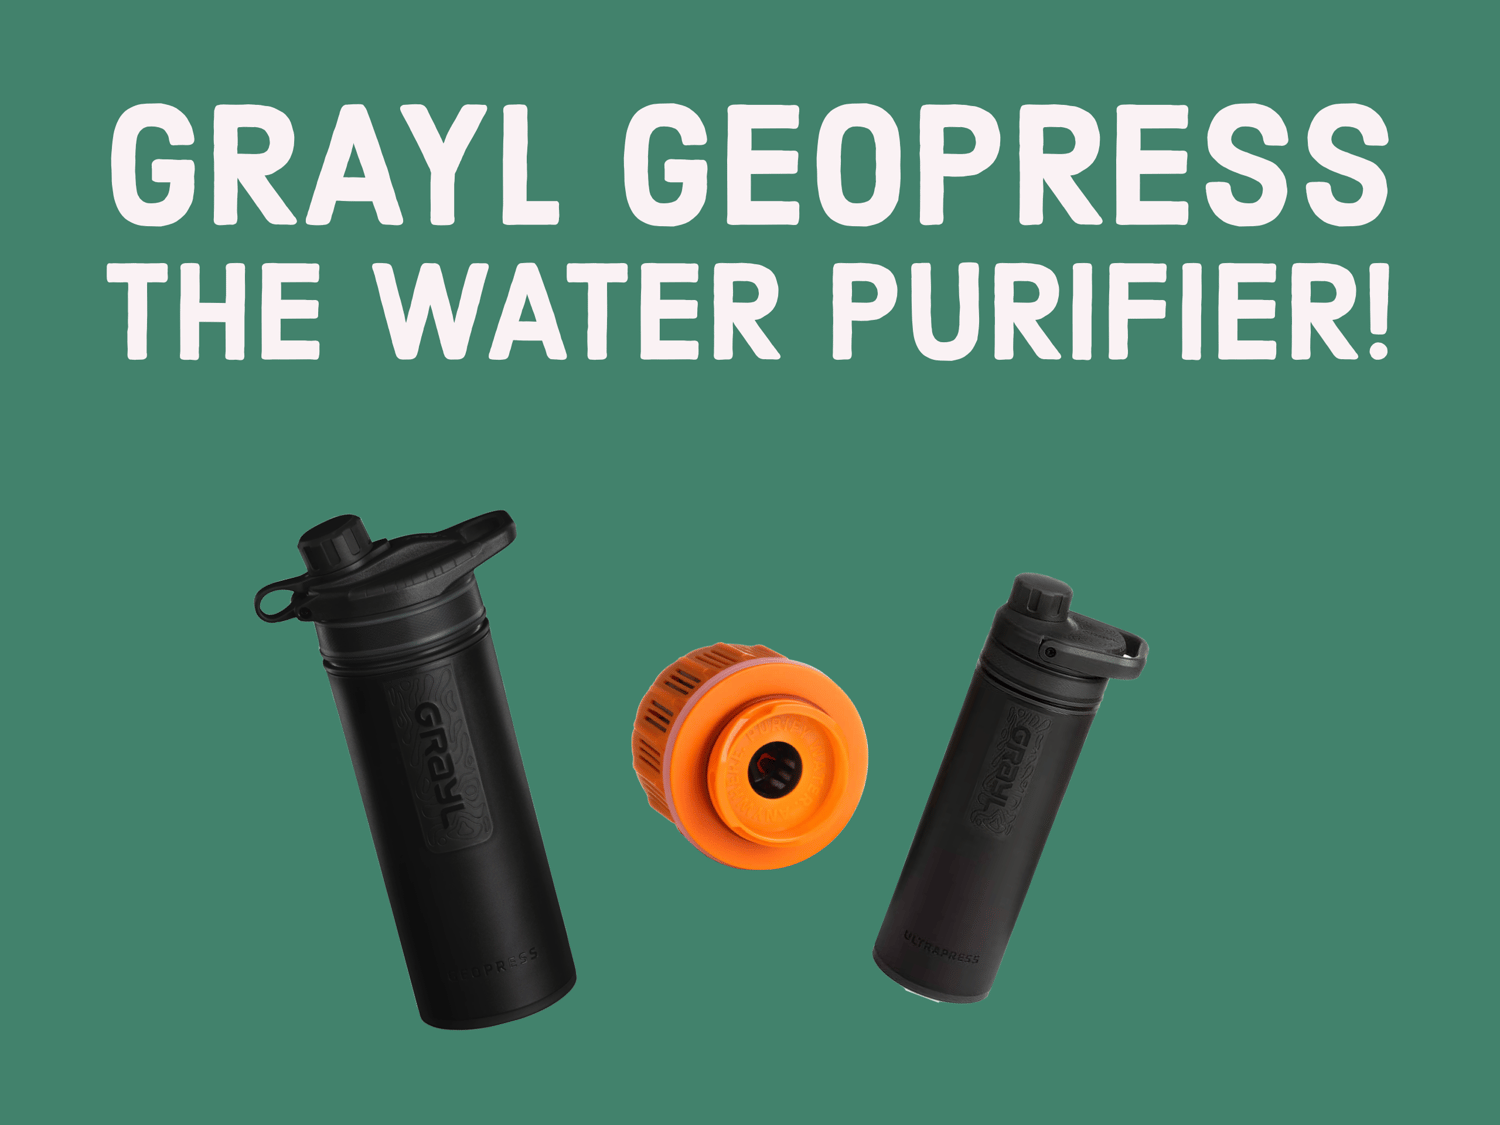 Image of Grayl water purifiers